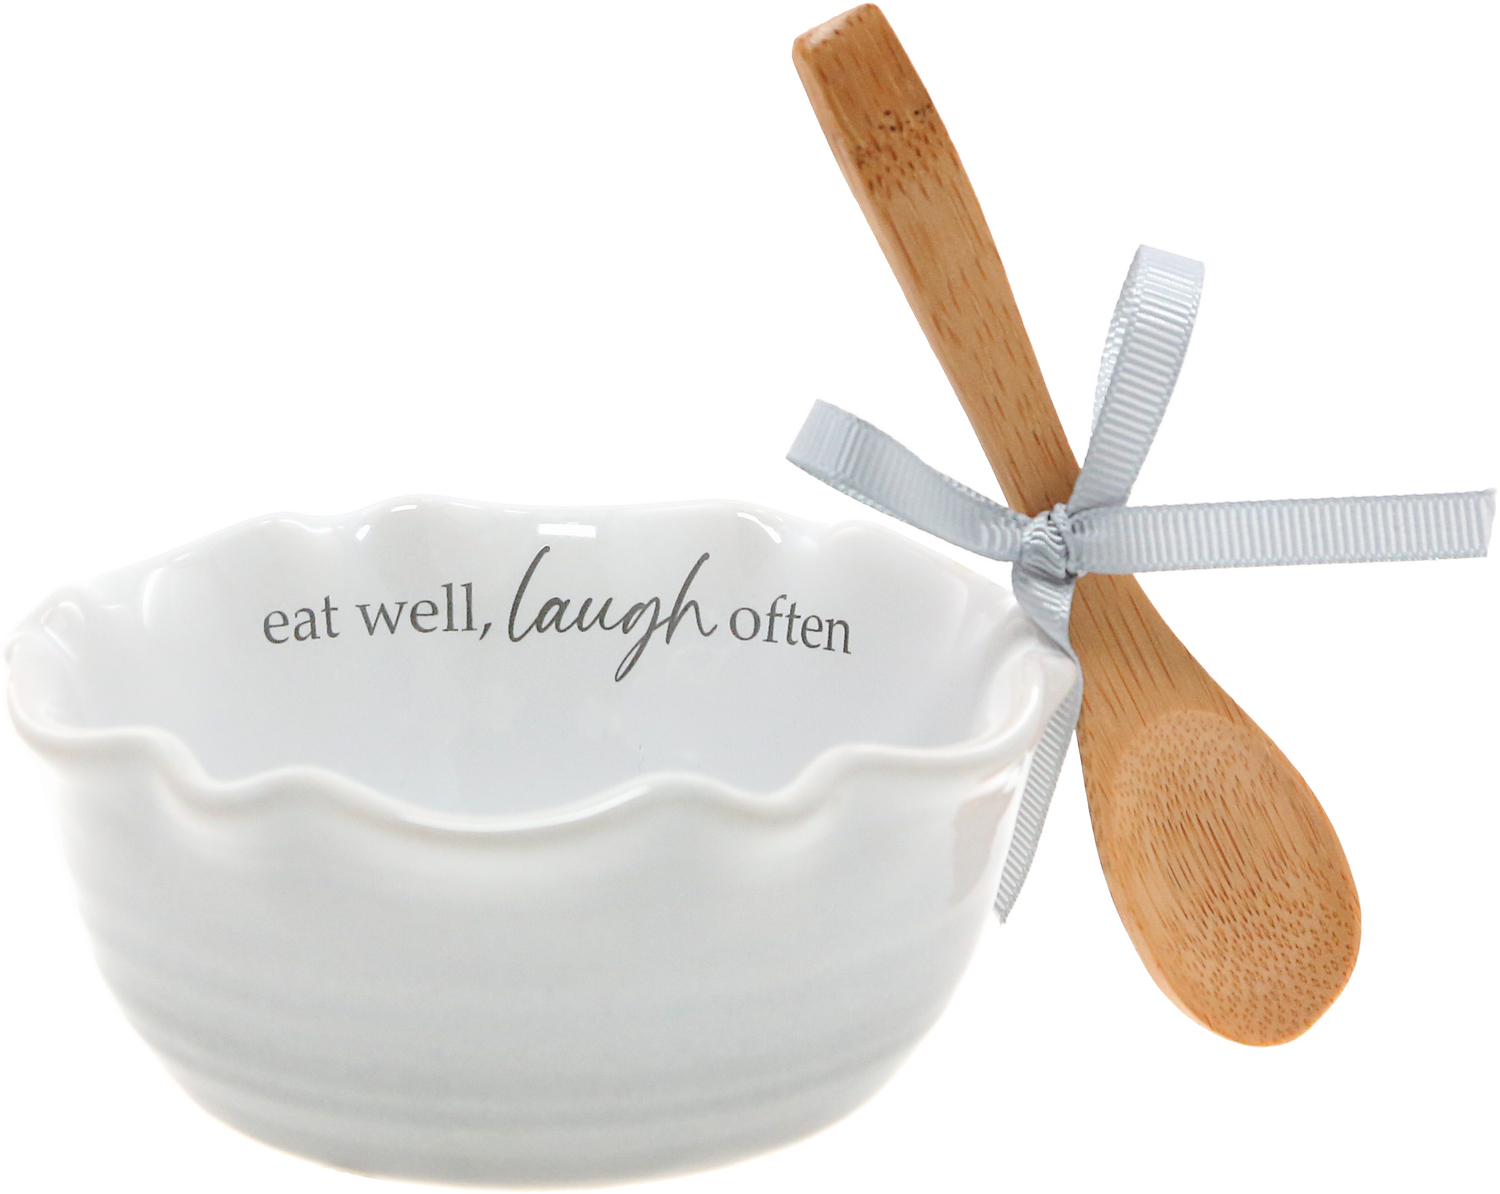 Eat well by Thoughts of Home - Eat well - 4.5" Ceramic Bowl with Bamboo Spoon